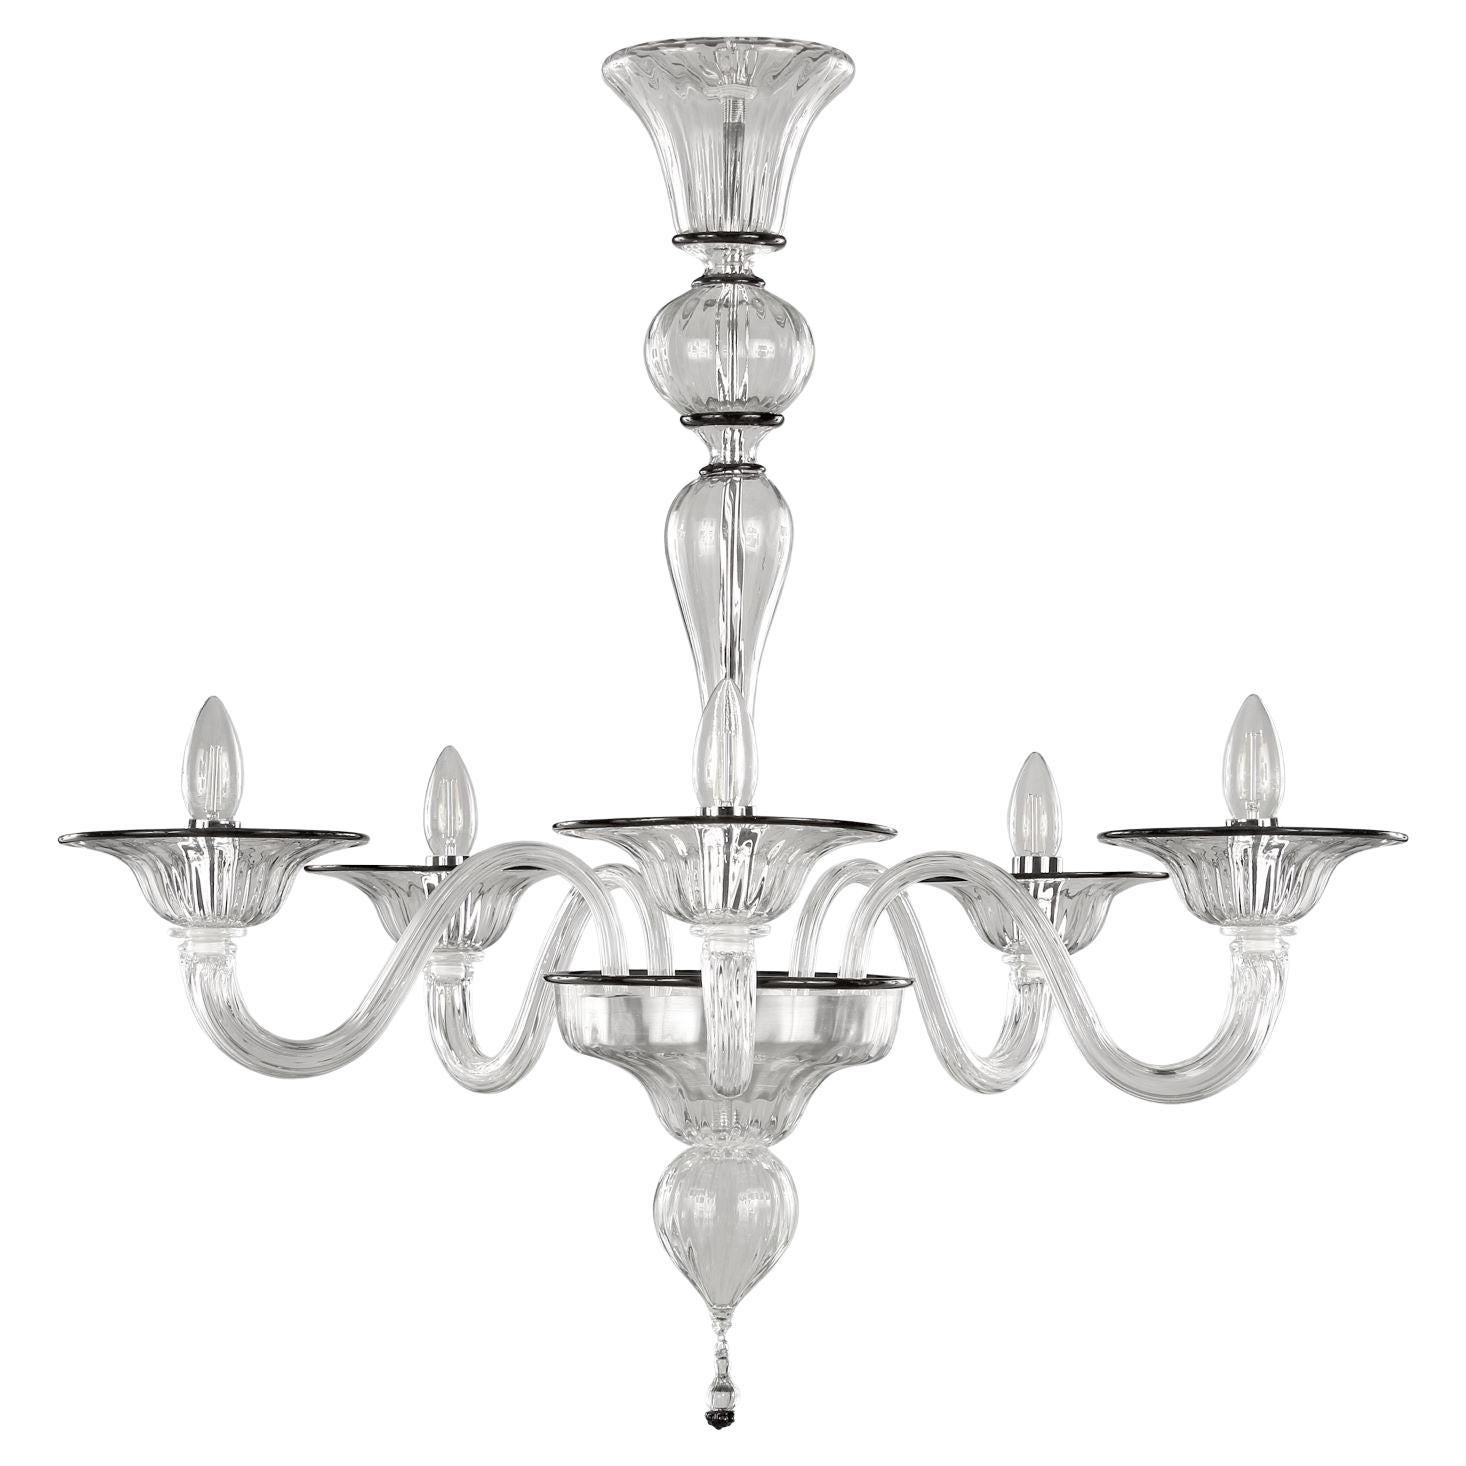 21st Century Chandelier, 5 Arms Crystal Murano Glass Black Details by Multiforme